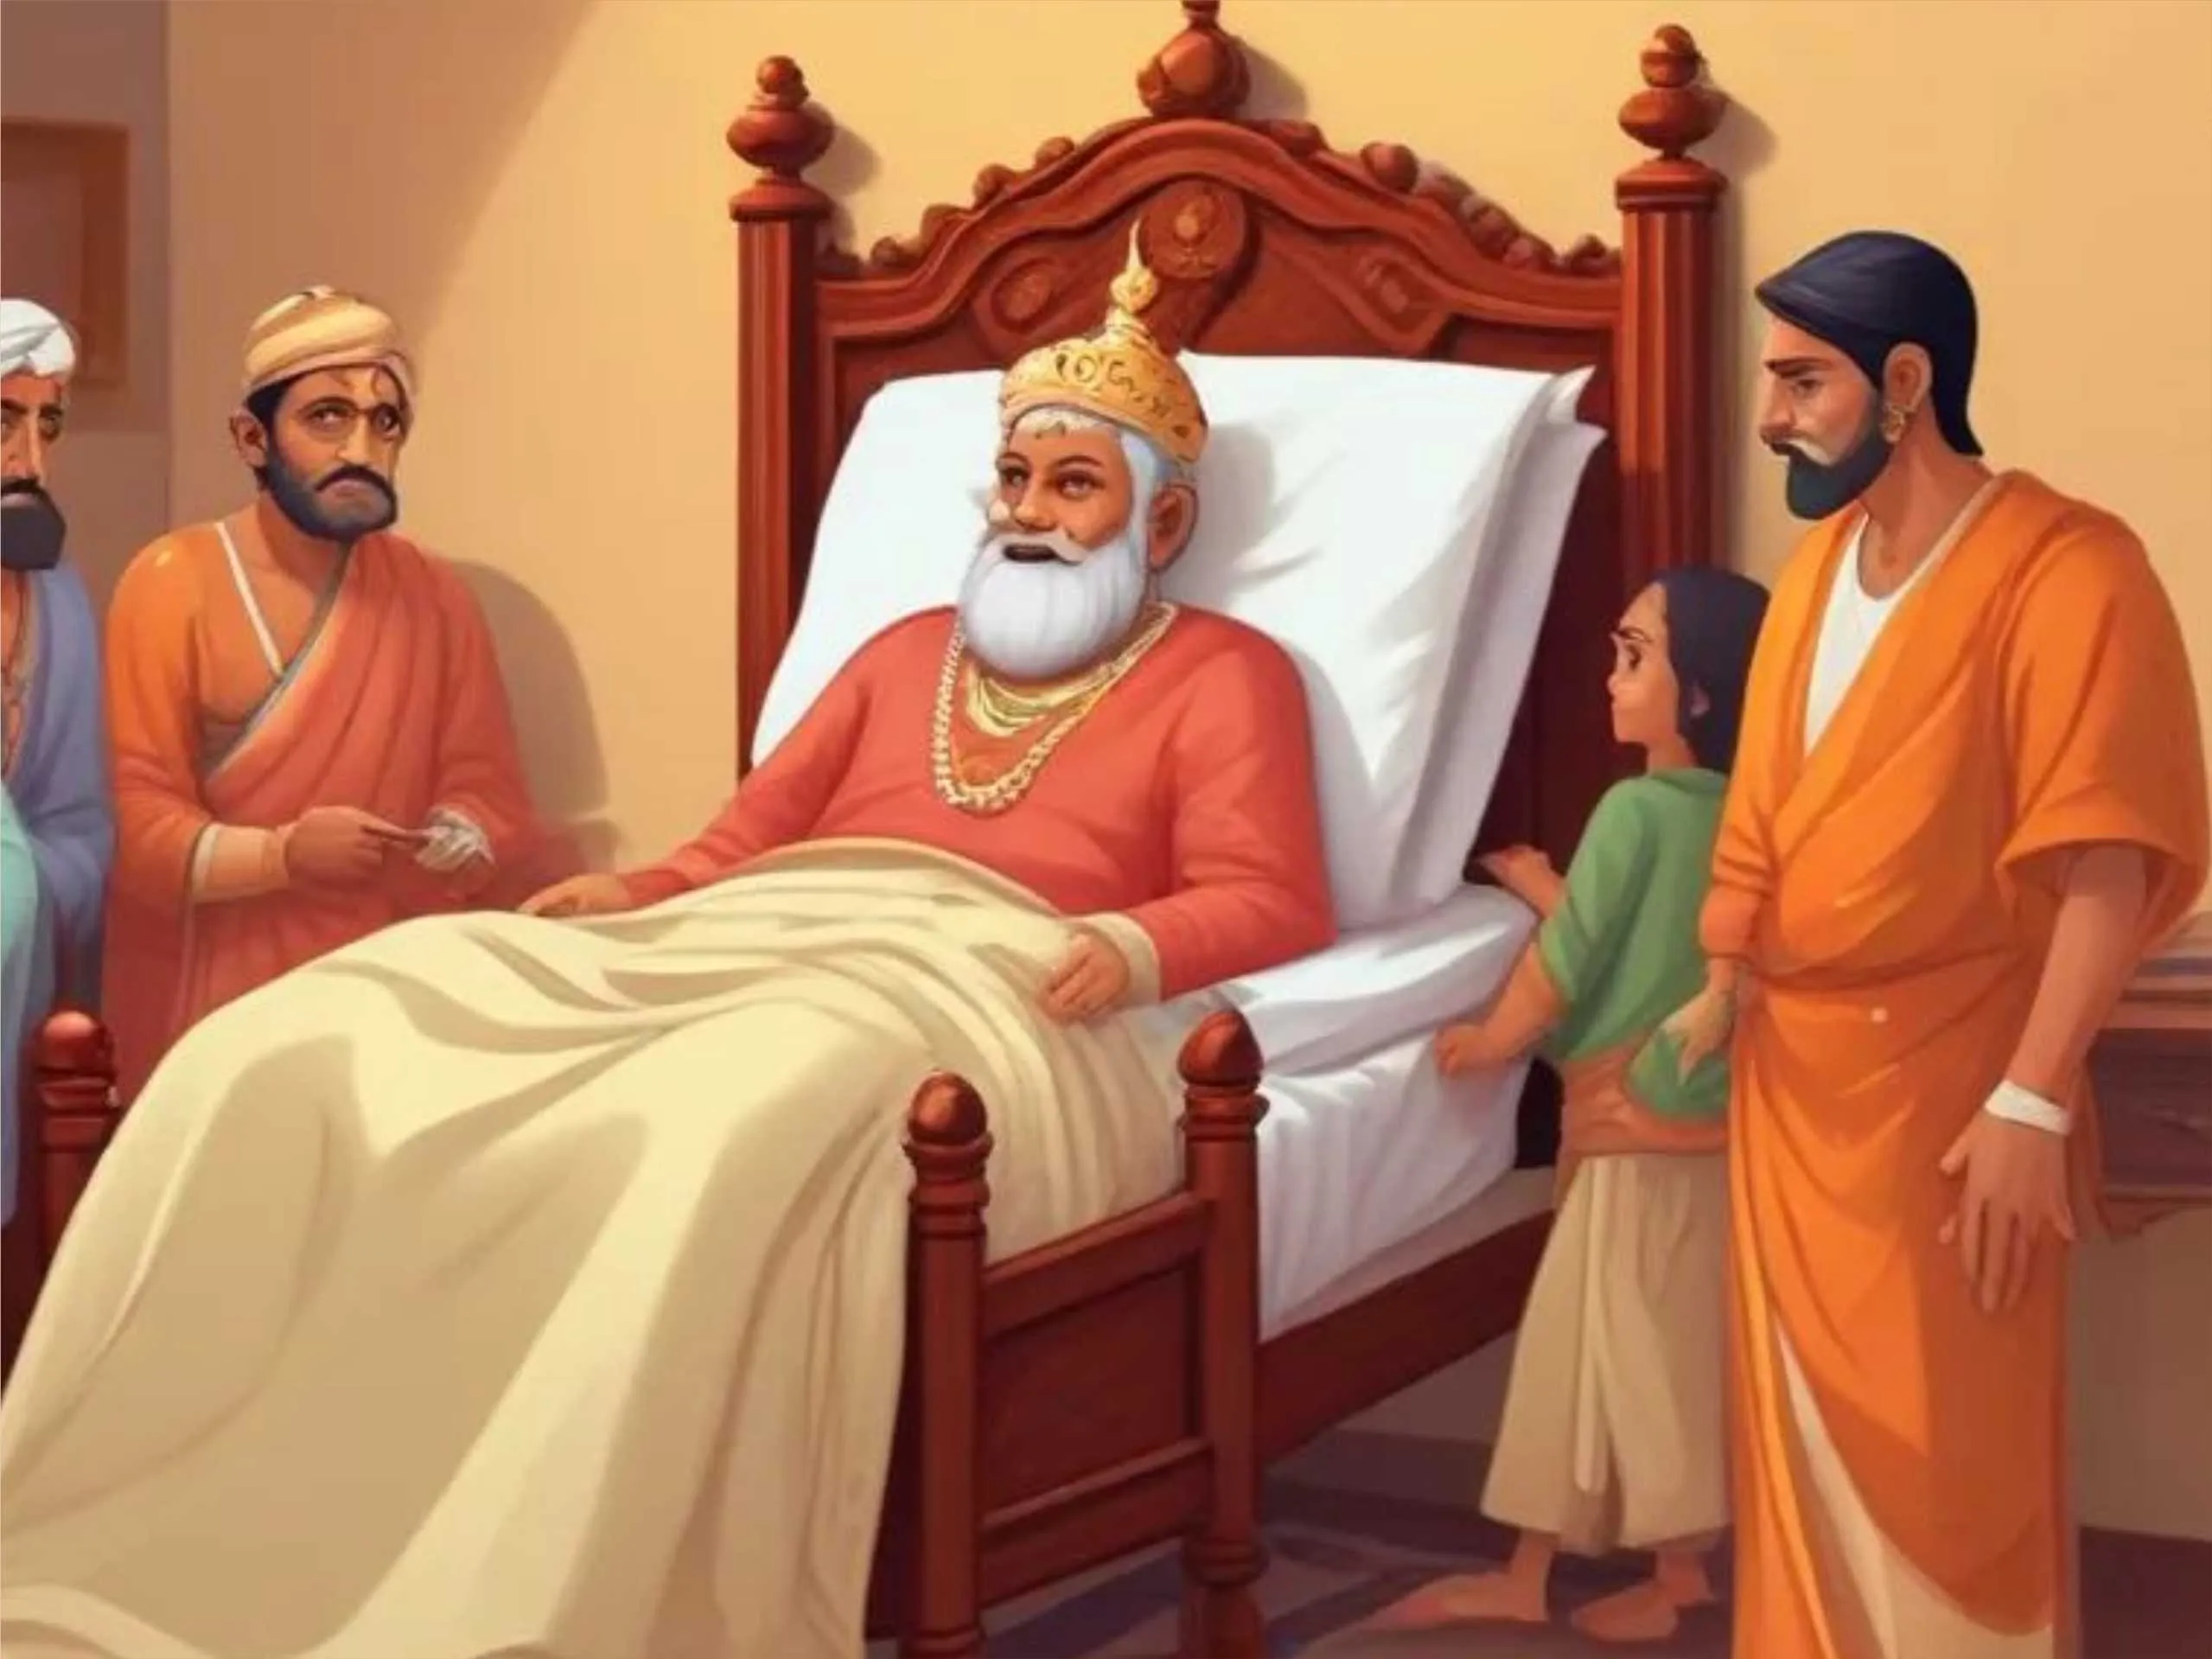 King on deathbed talking to his sons cartoon image